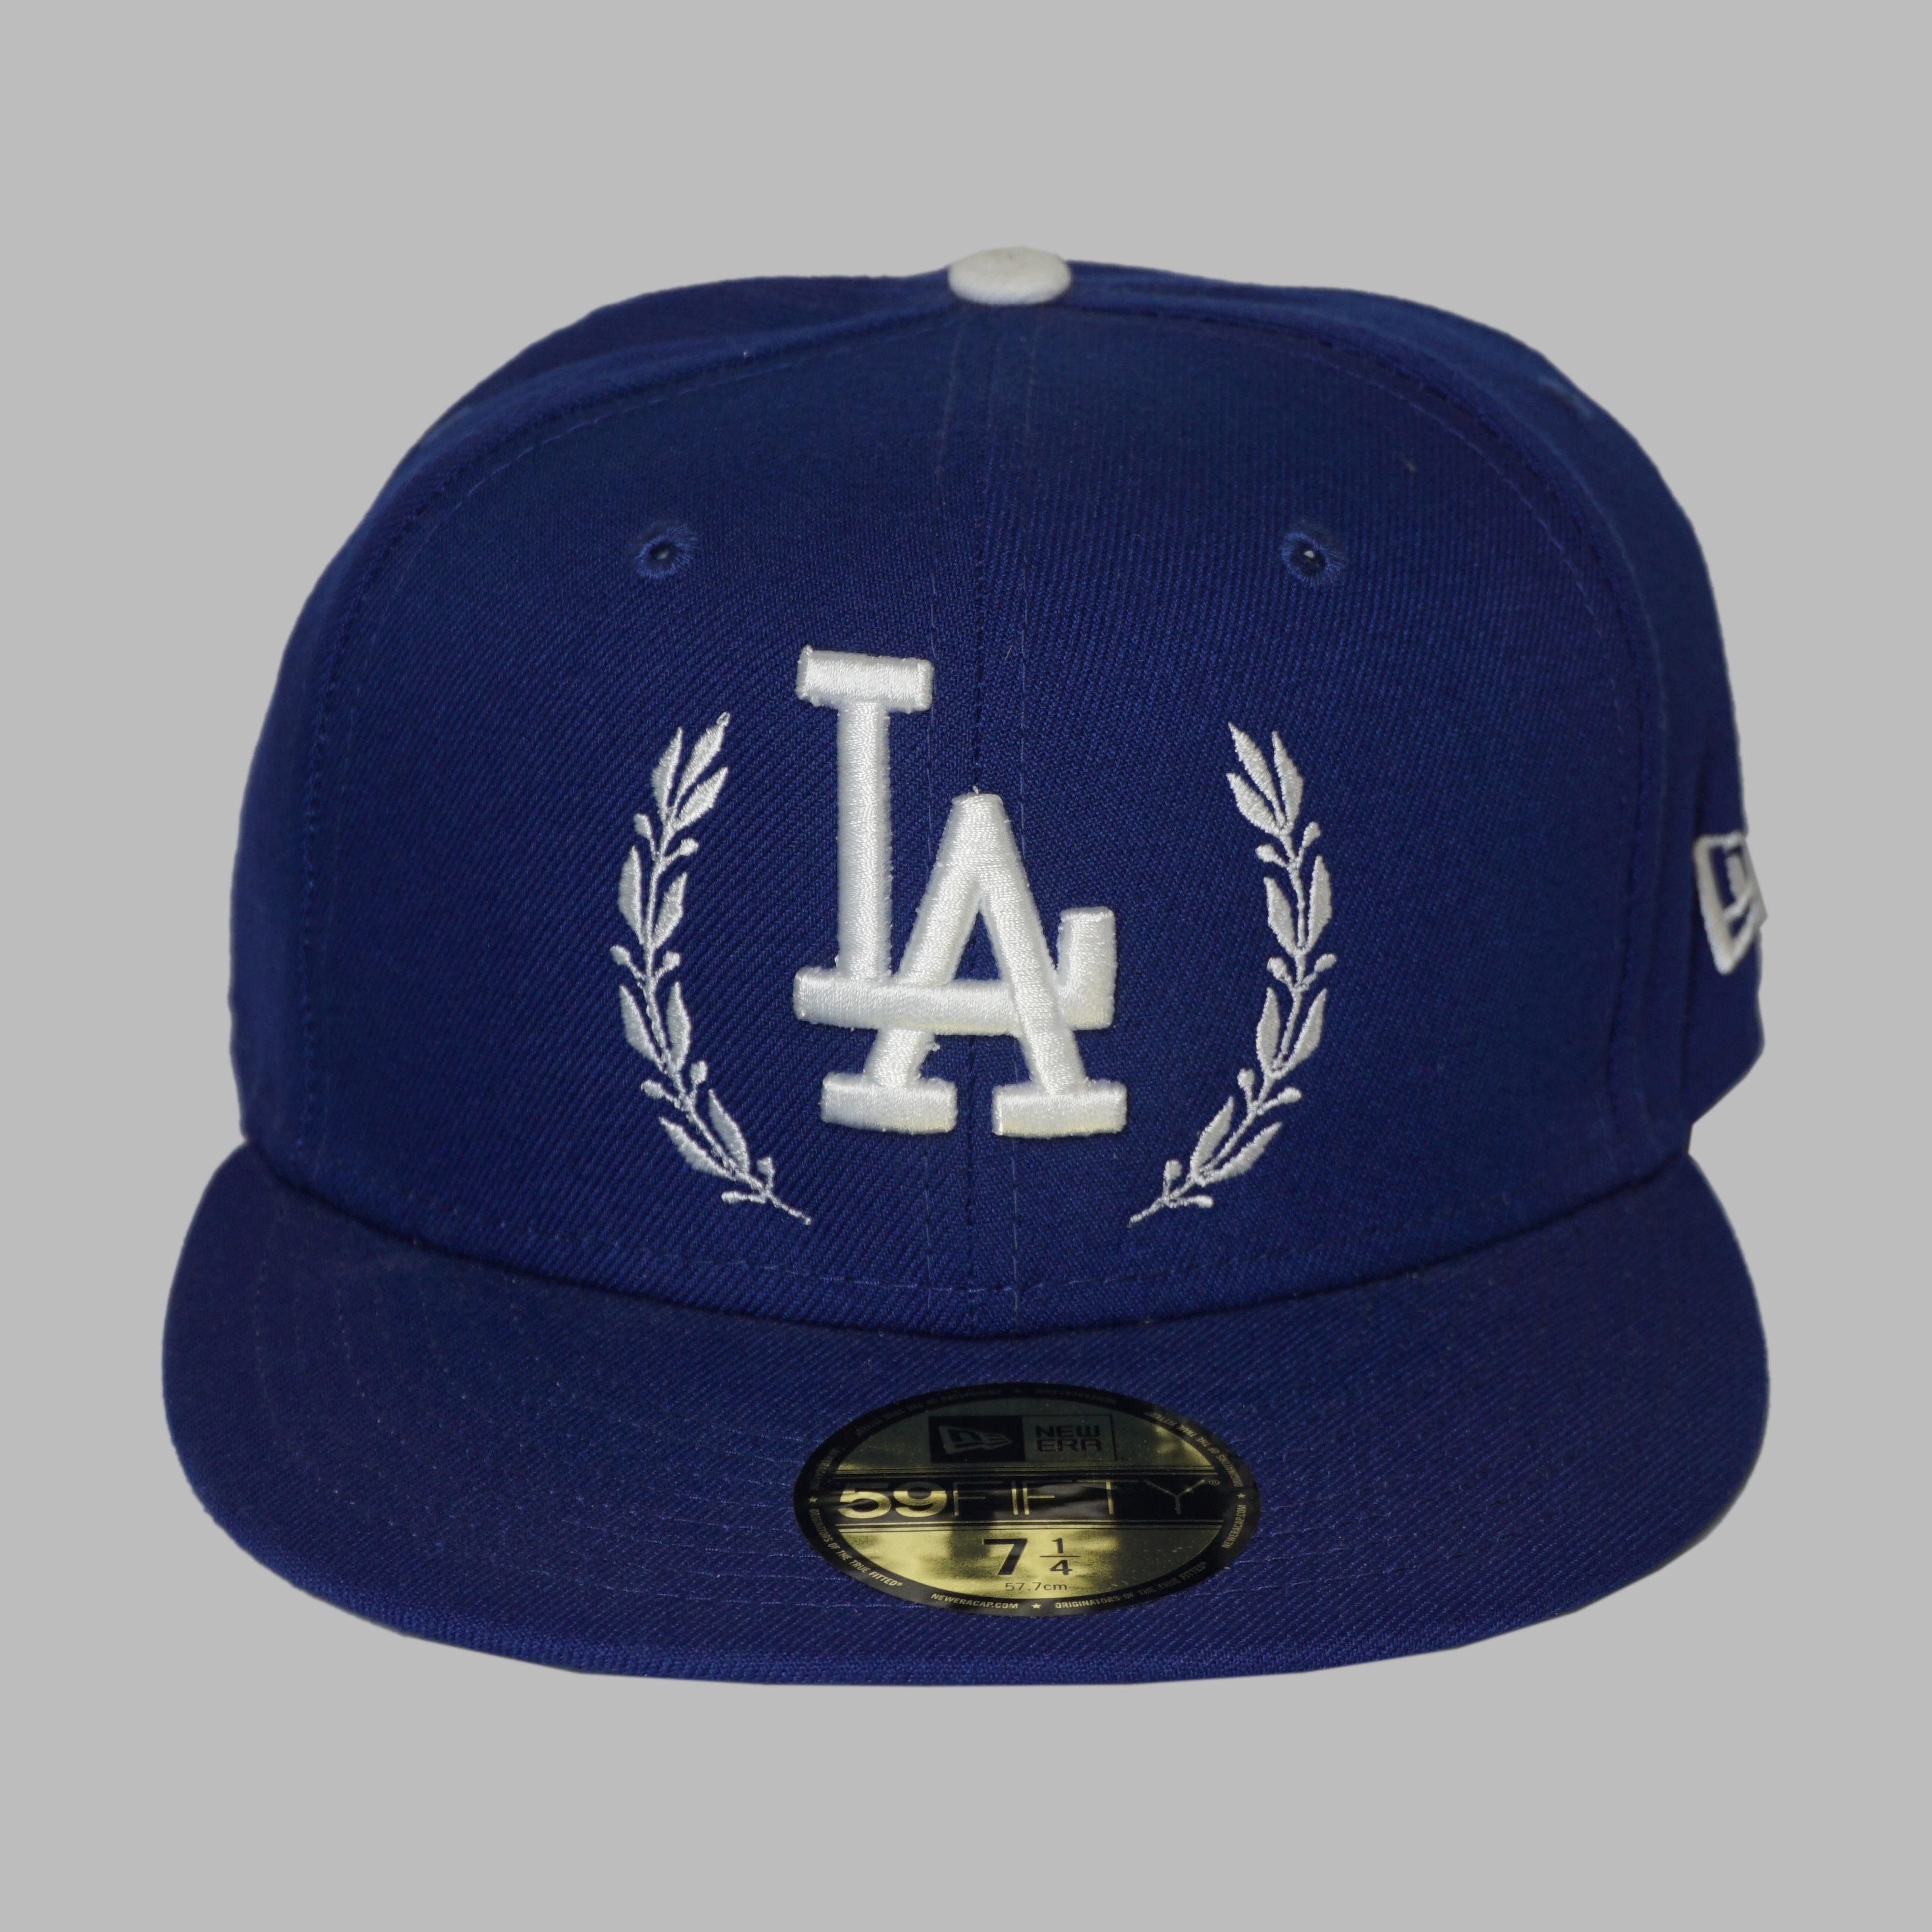 BLUE CHAMPION FITTED (size 7 1/4)